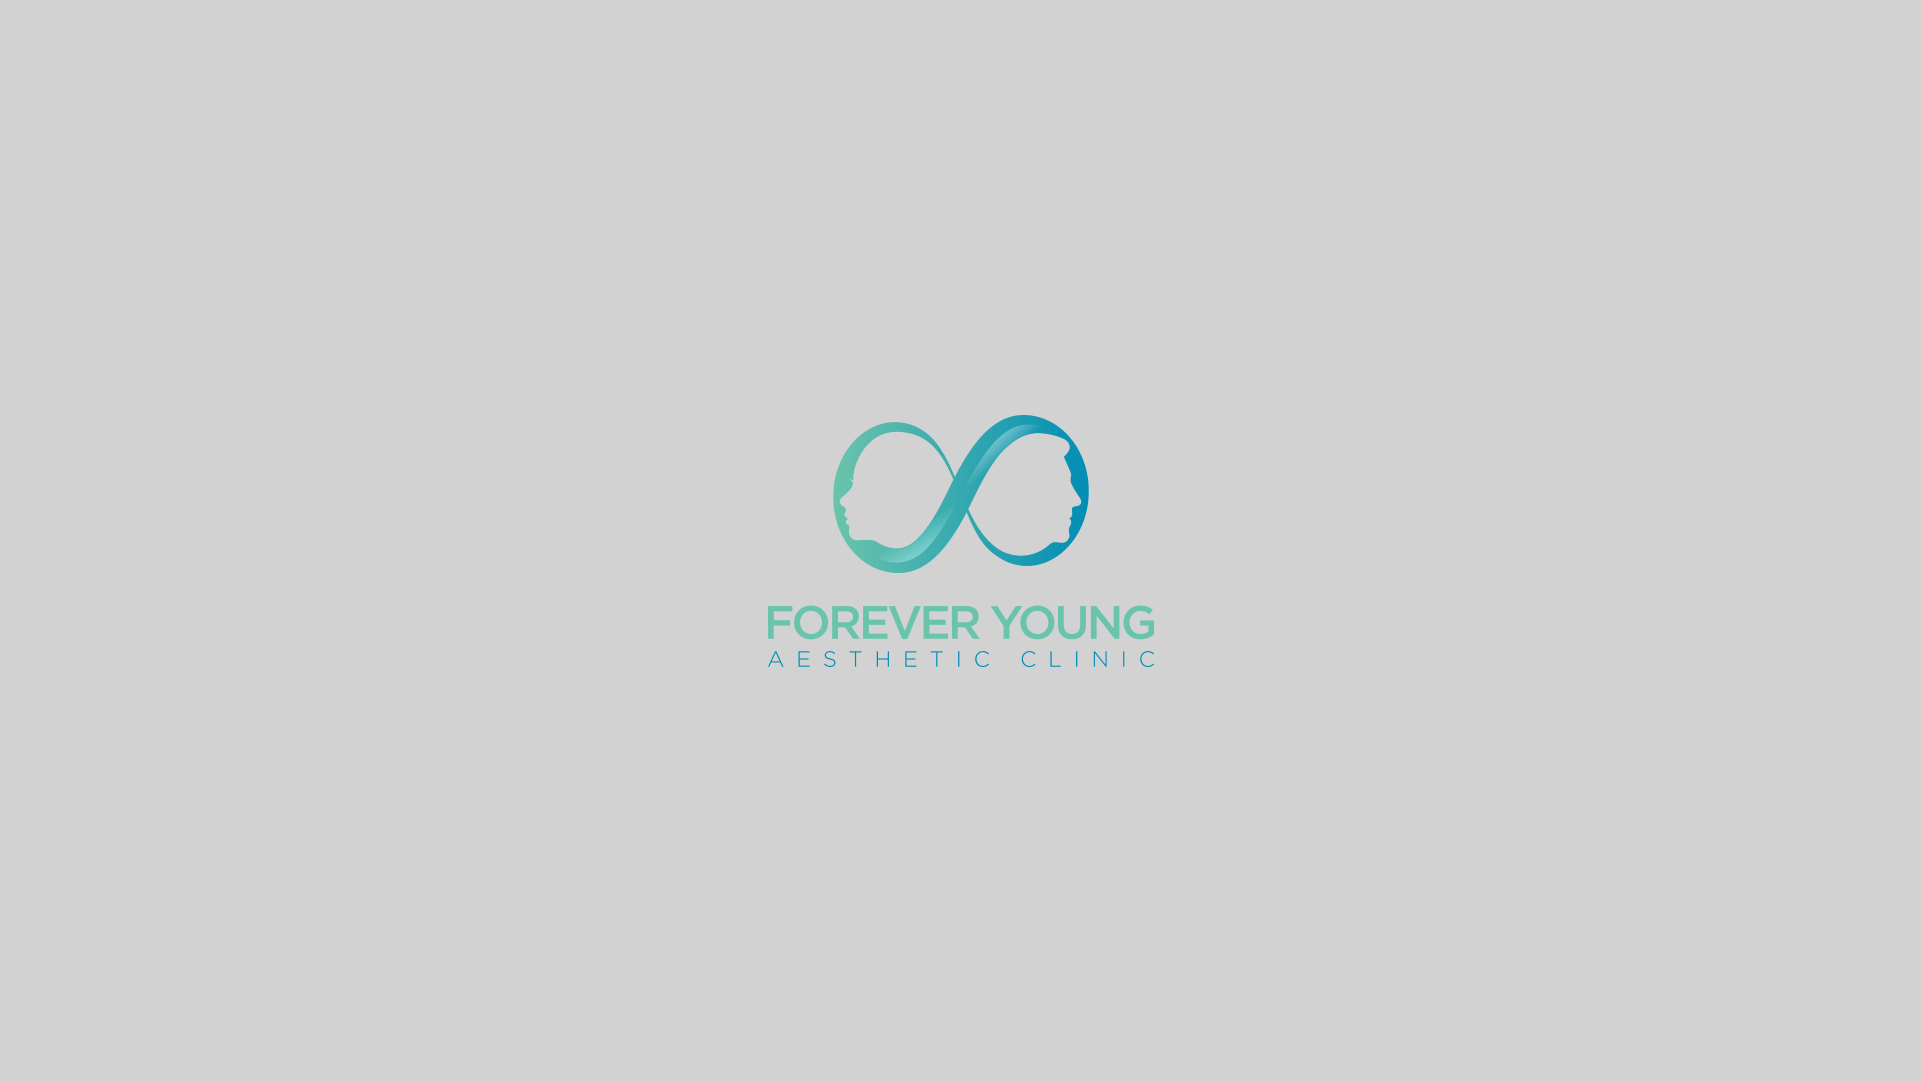 Forever Young Aesthetic Clinic